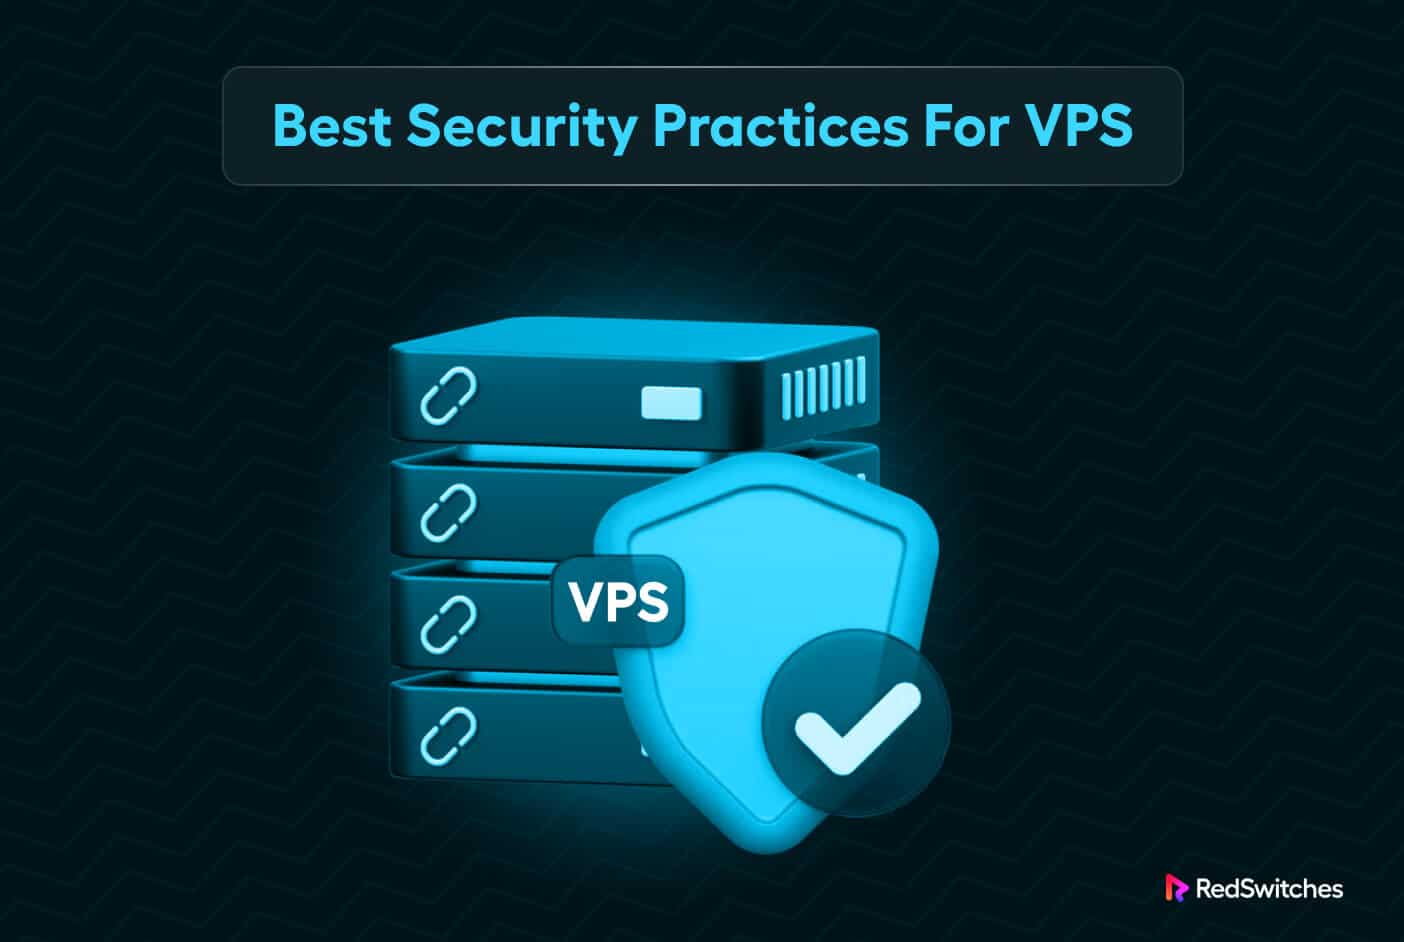 Best Security Practices For VPS